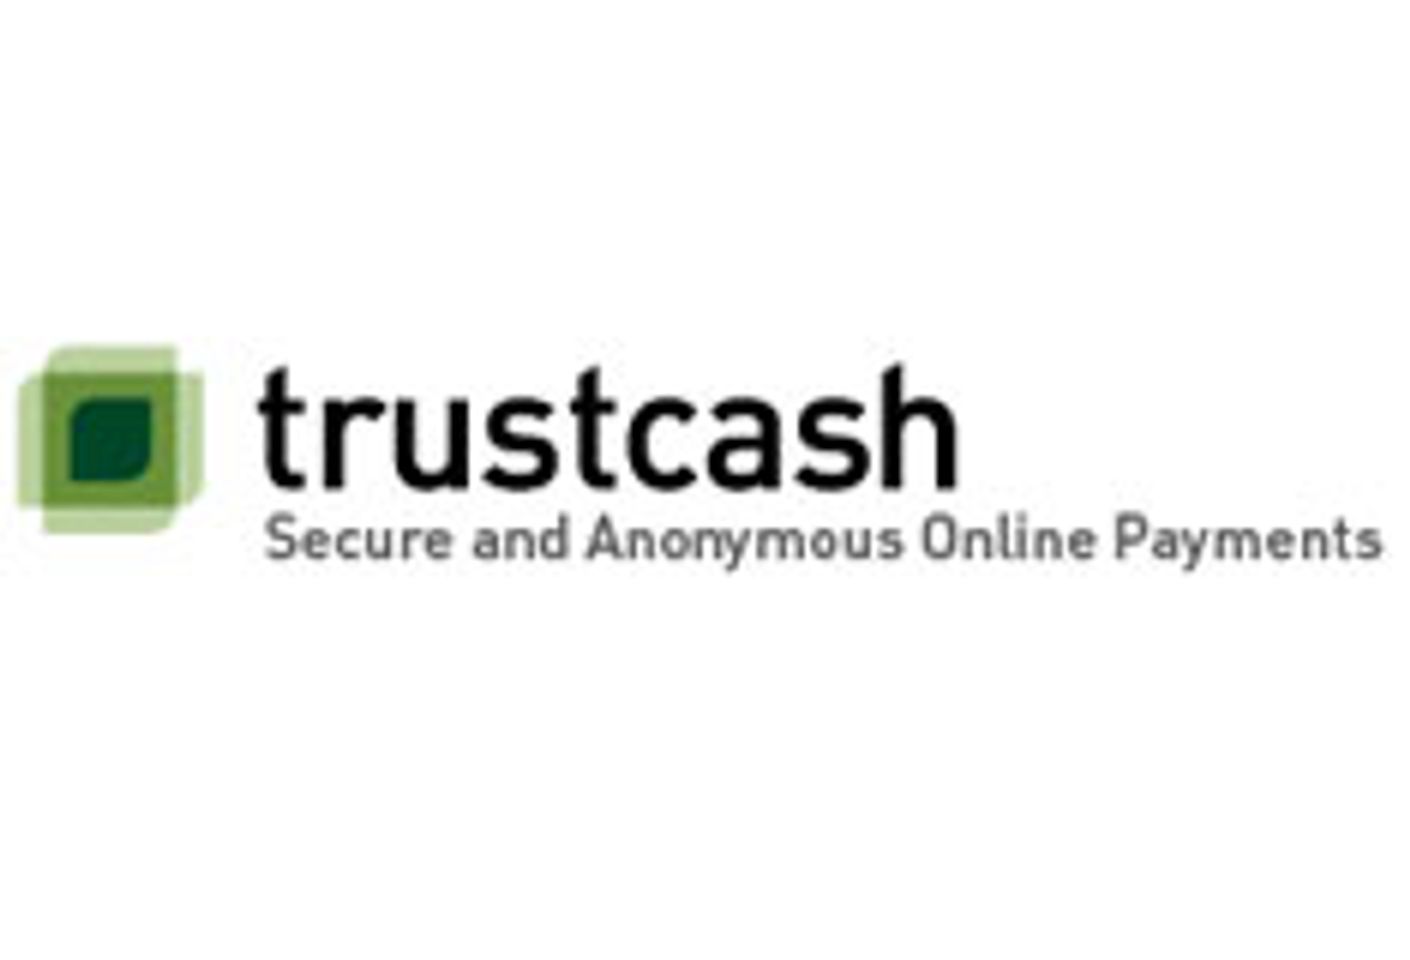 PPPcard Becomes Trustcash, Expands Distribution